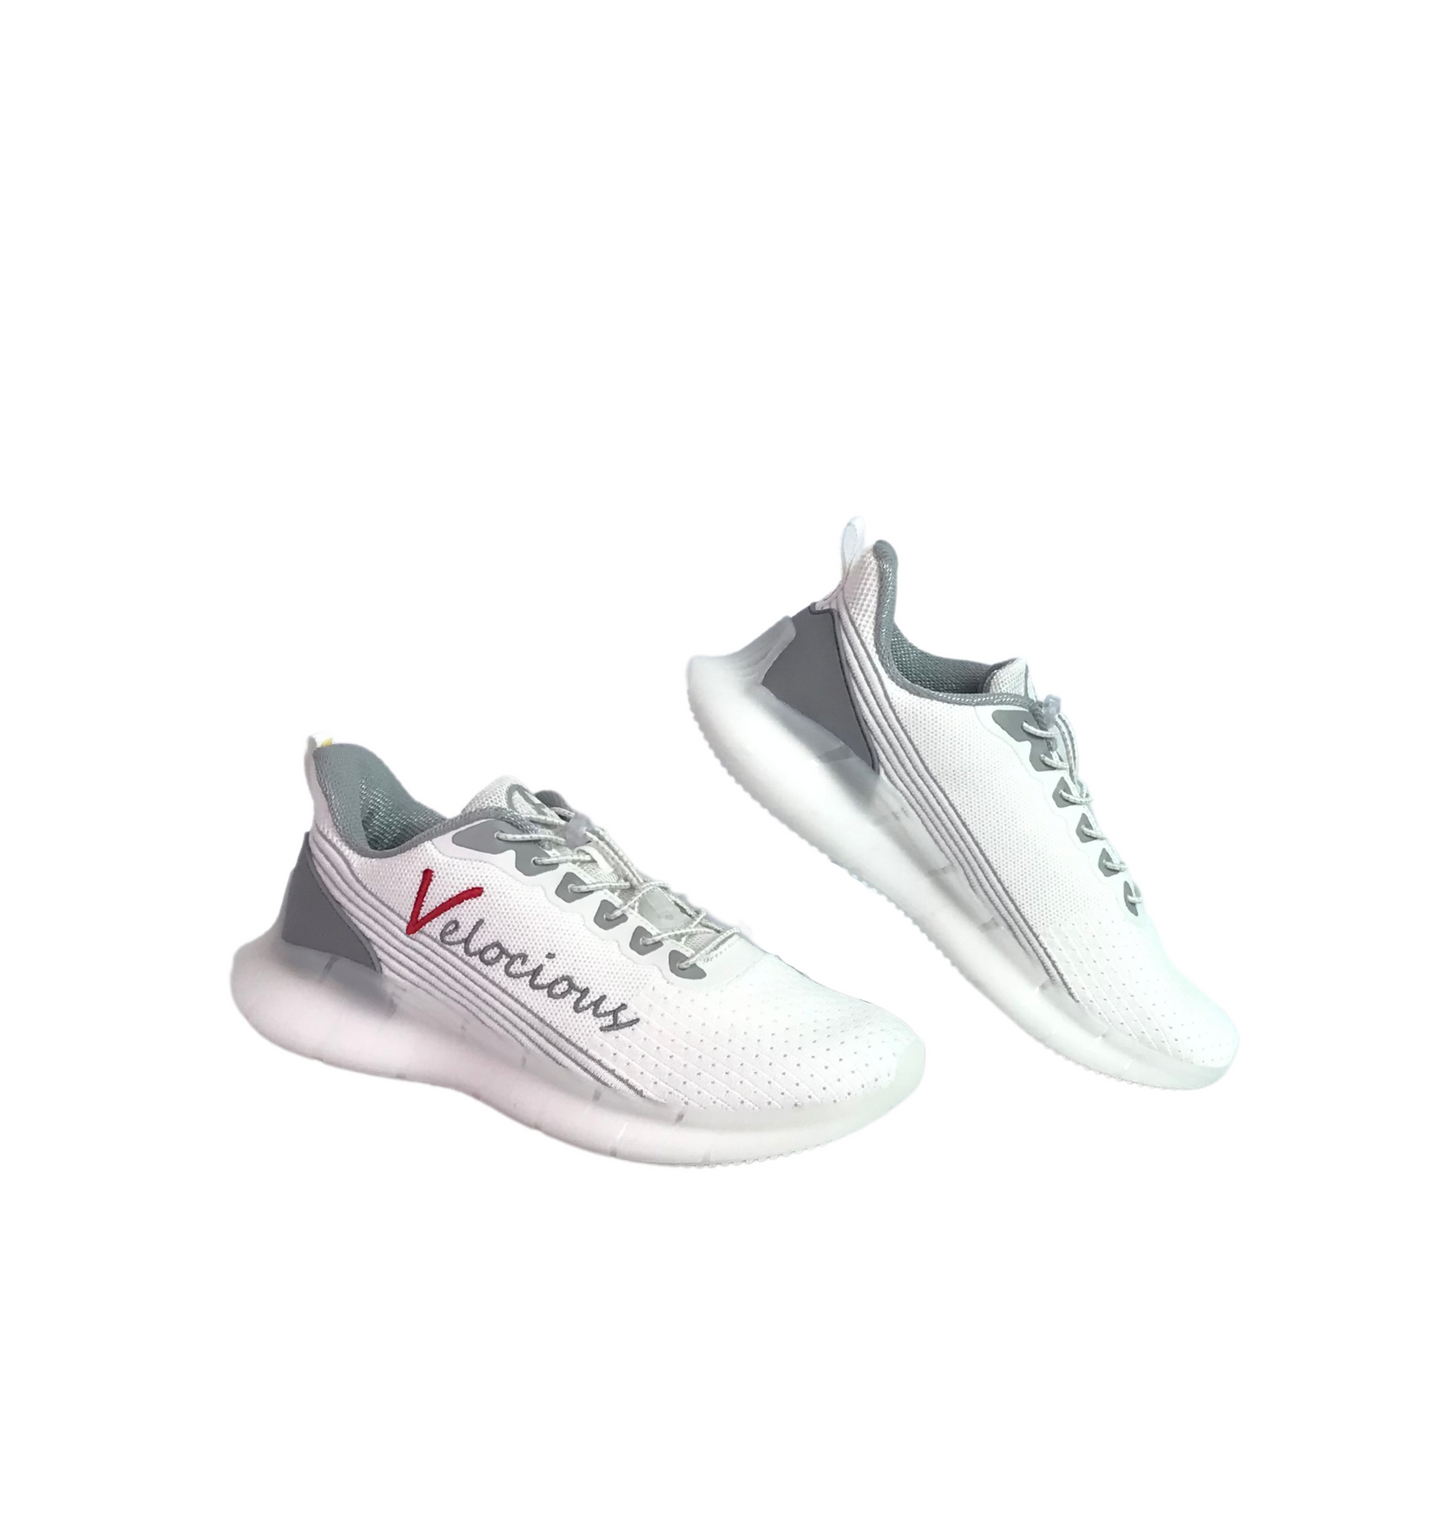 White Velocious Sport Shoes